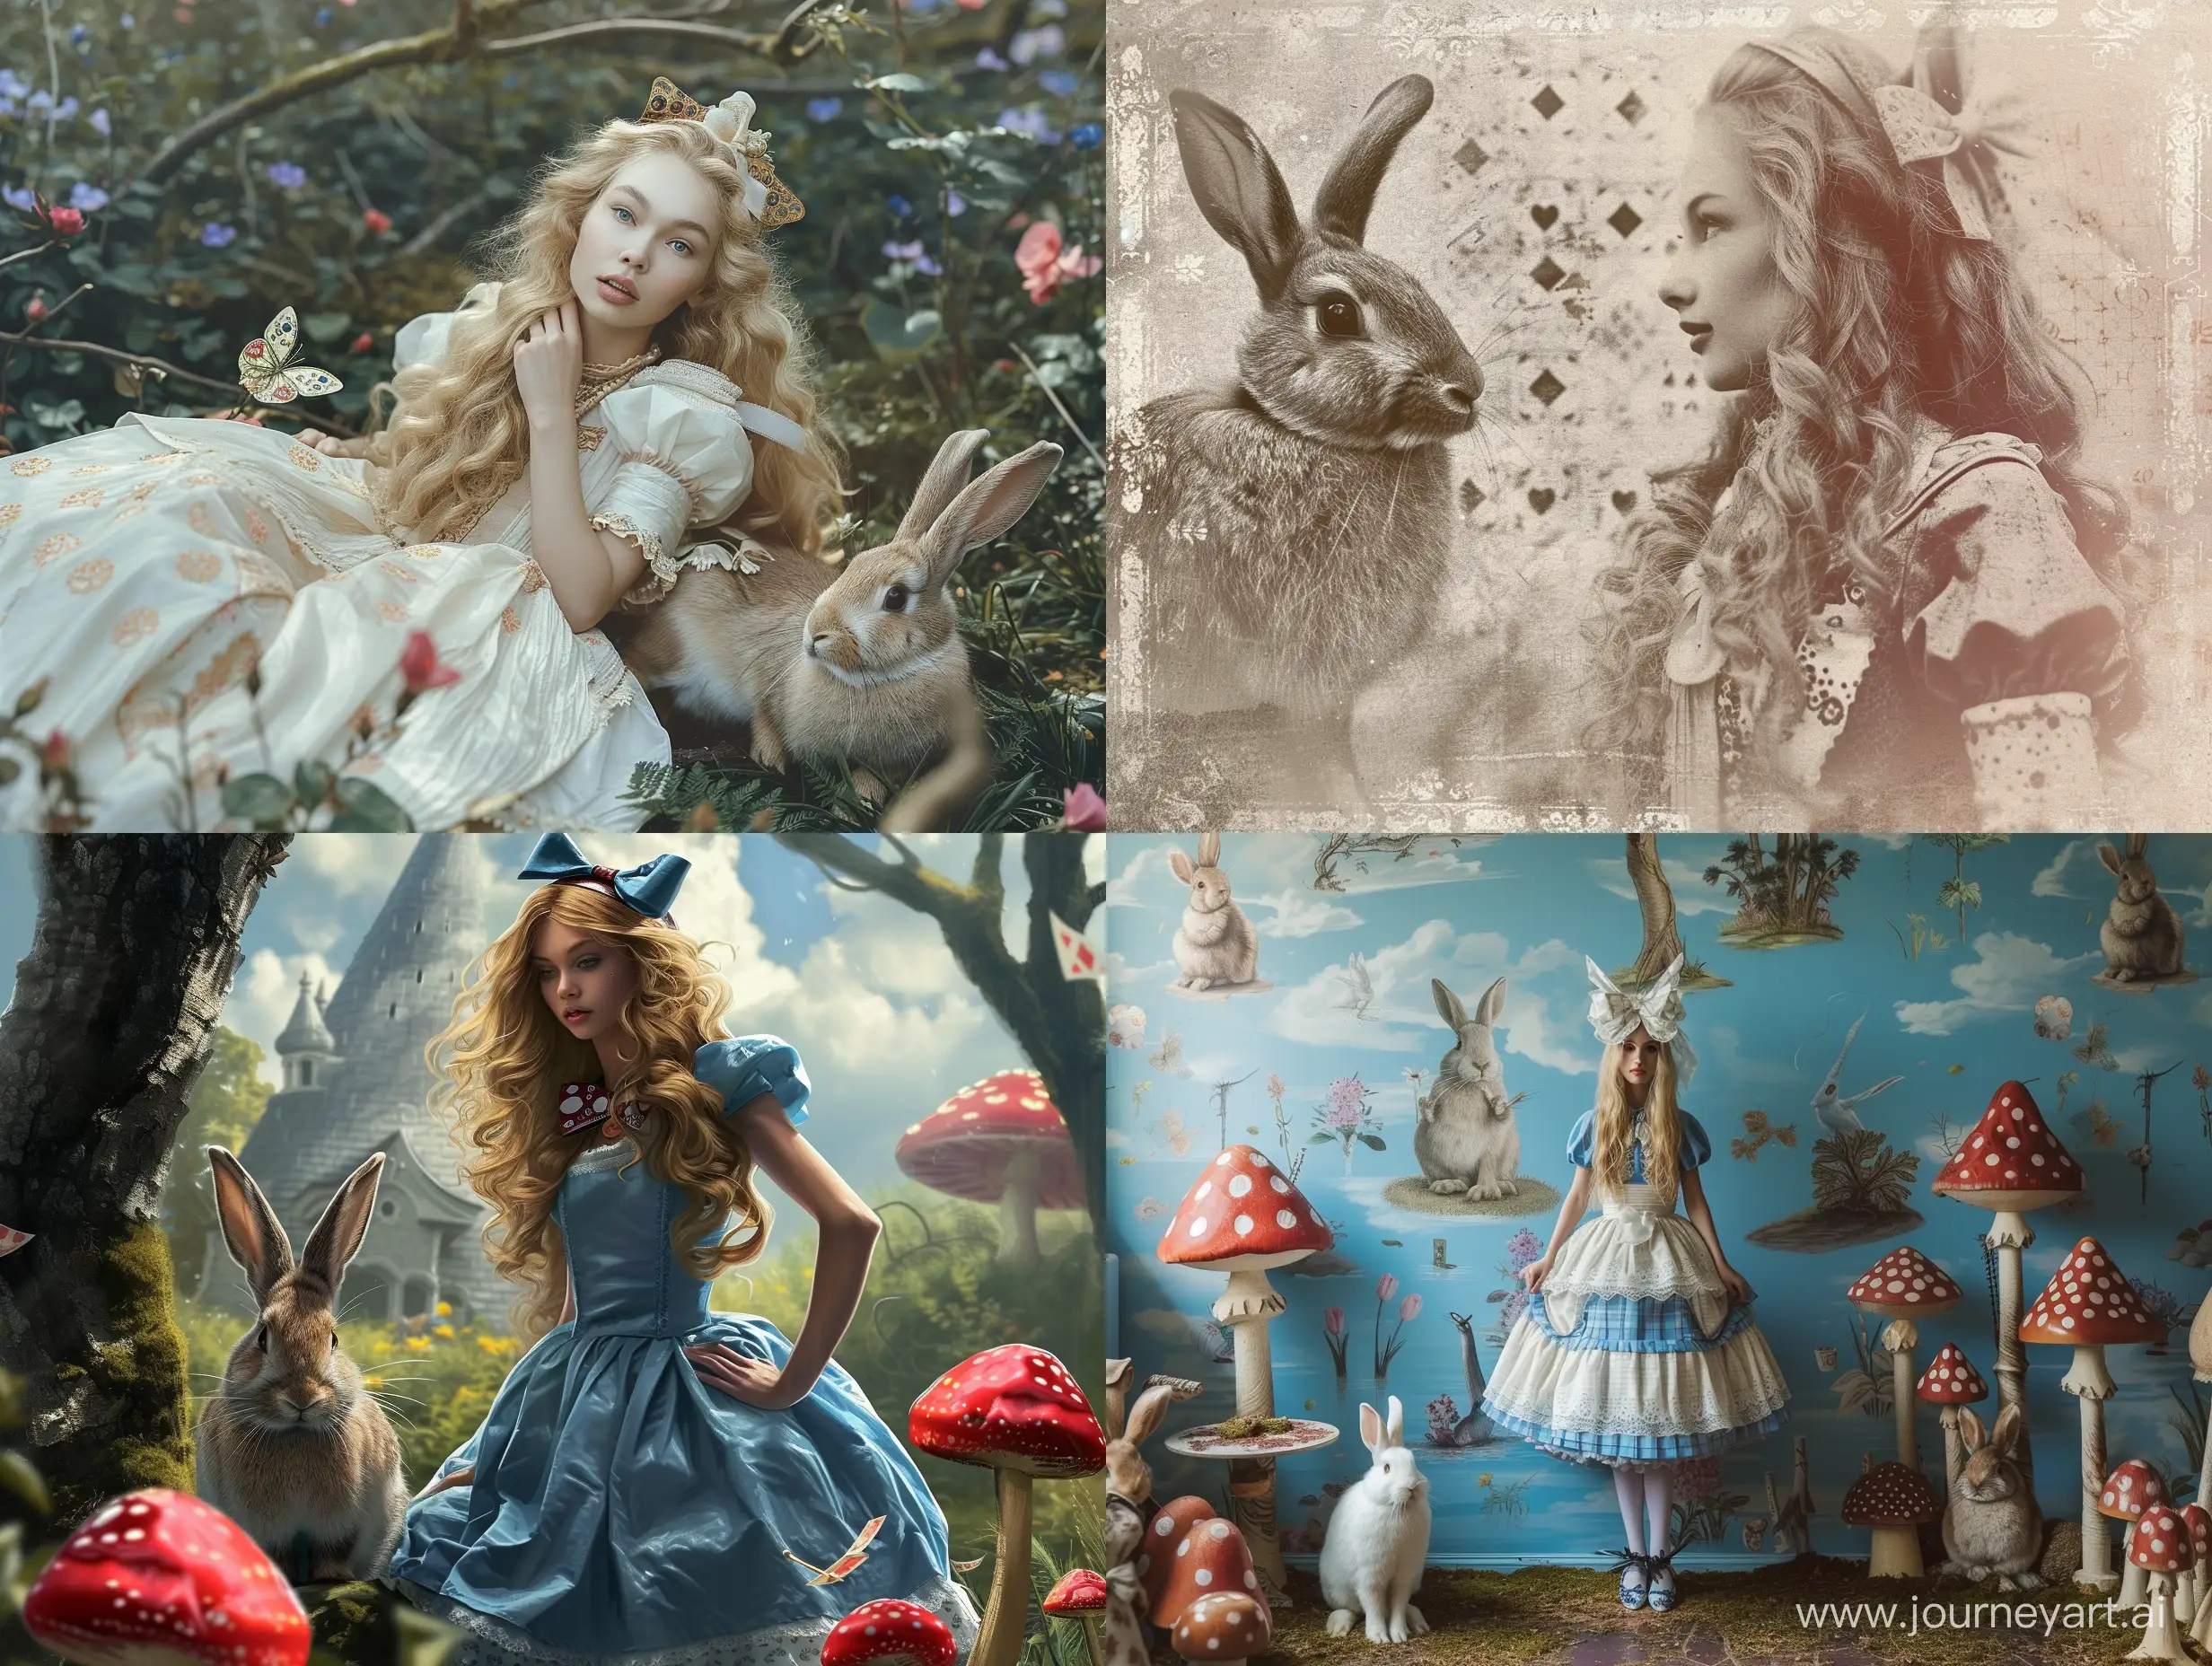 Curious-Woman-and-Rabbit-Encounter-in-Wonderland